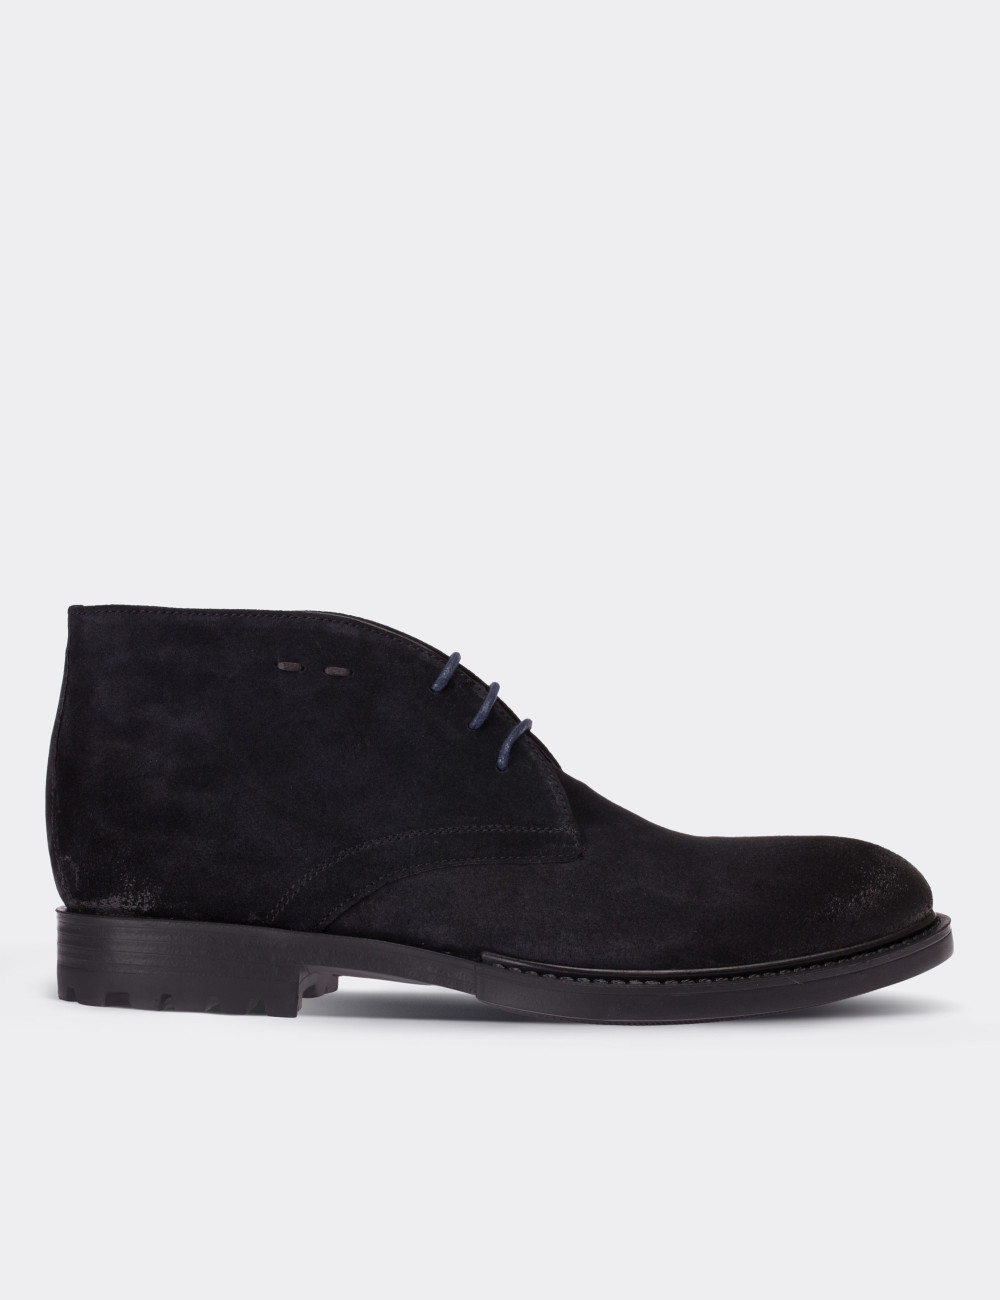 Navy Suede Leather Desert Boots - 01295MLCVC01